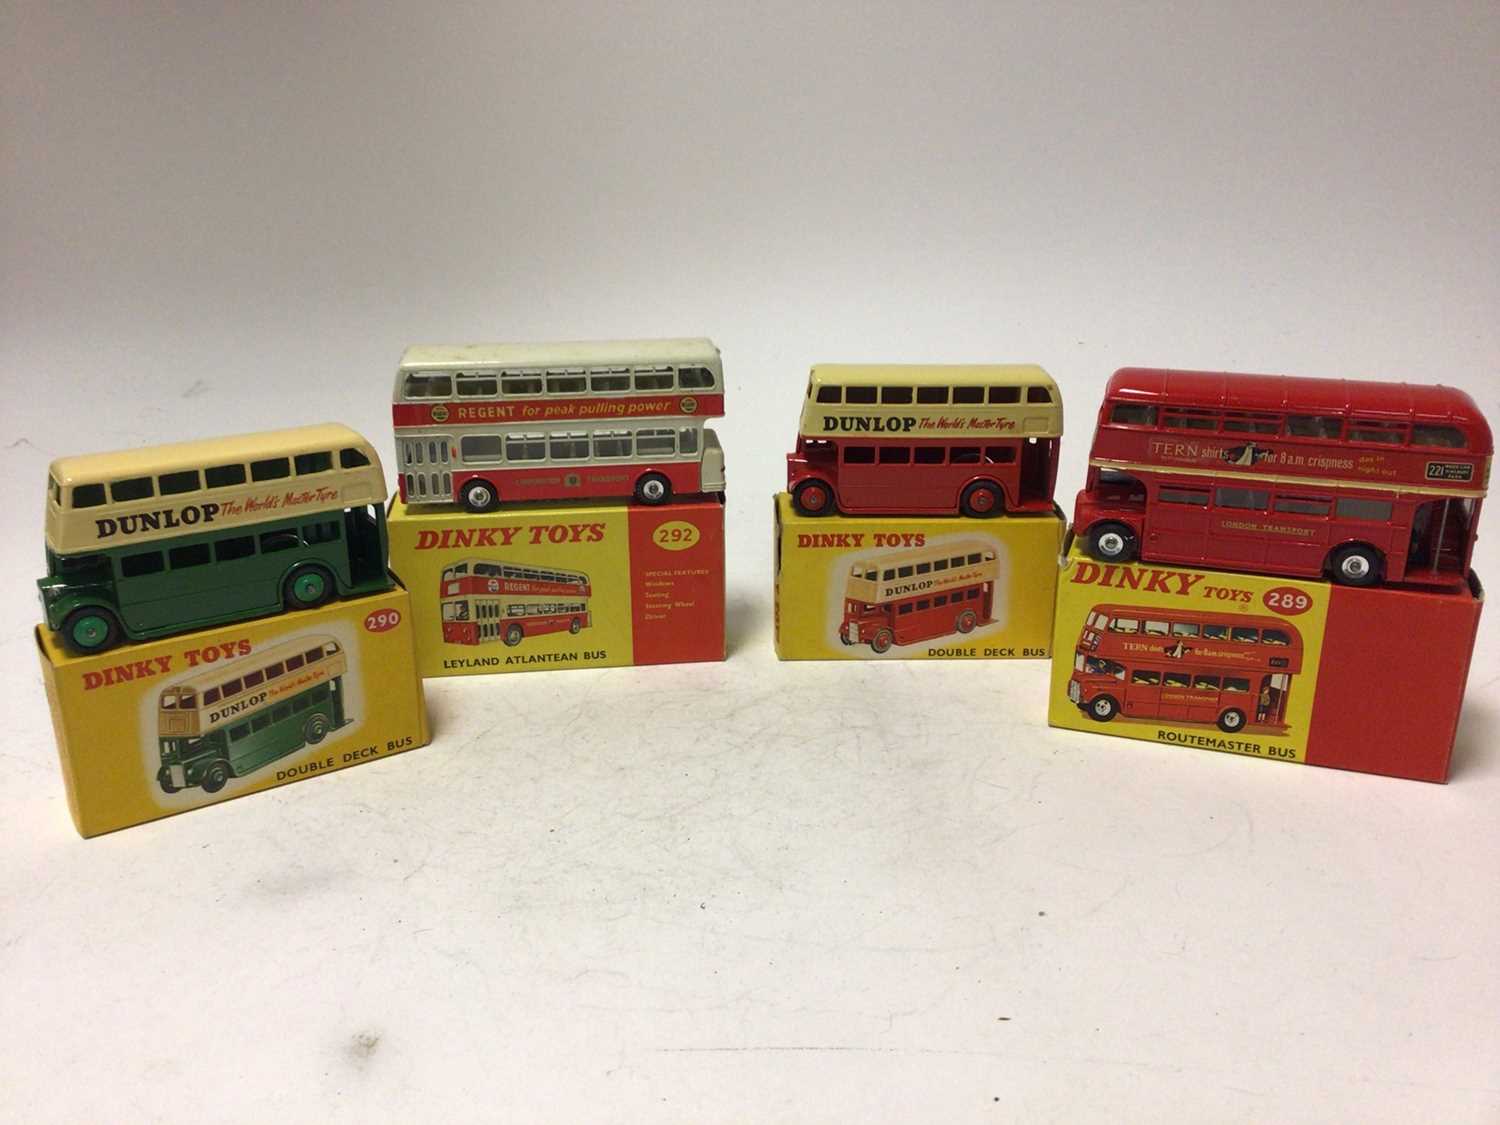 Dinky Double Deck Bus (Both Red & Green issues) Routemaster Bus No 289, Leyland Atlantean Bus No 292